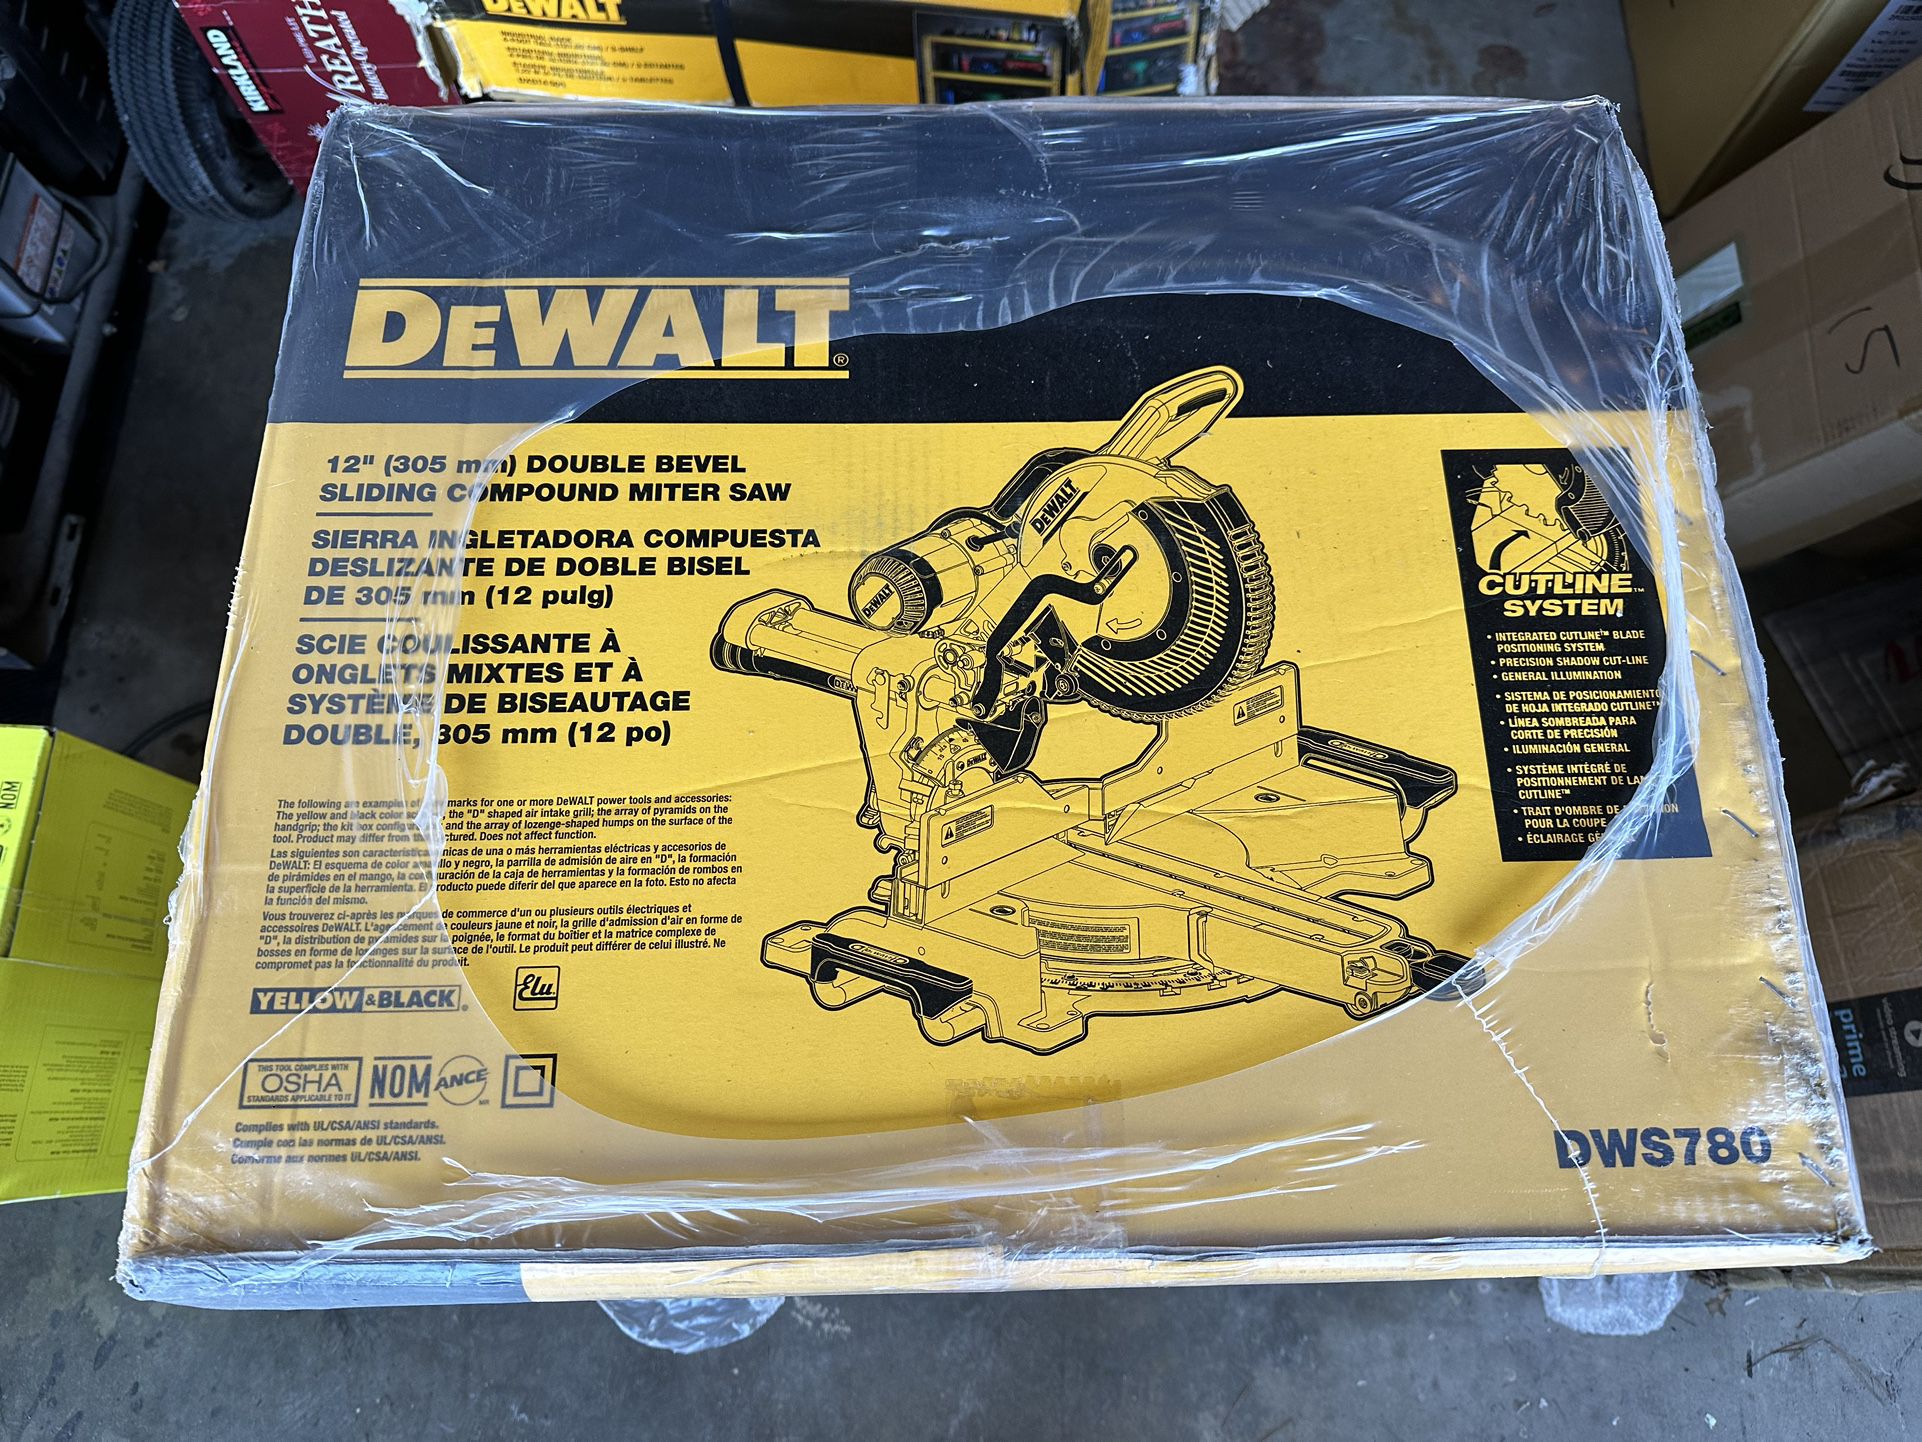 Dewalt 15 Amp Corded 12 in. Double Bevel Sliding Compound Miter Saw with XPS technology, Blade Wrench and Material Clamp